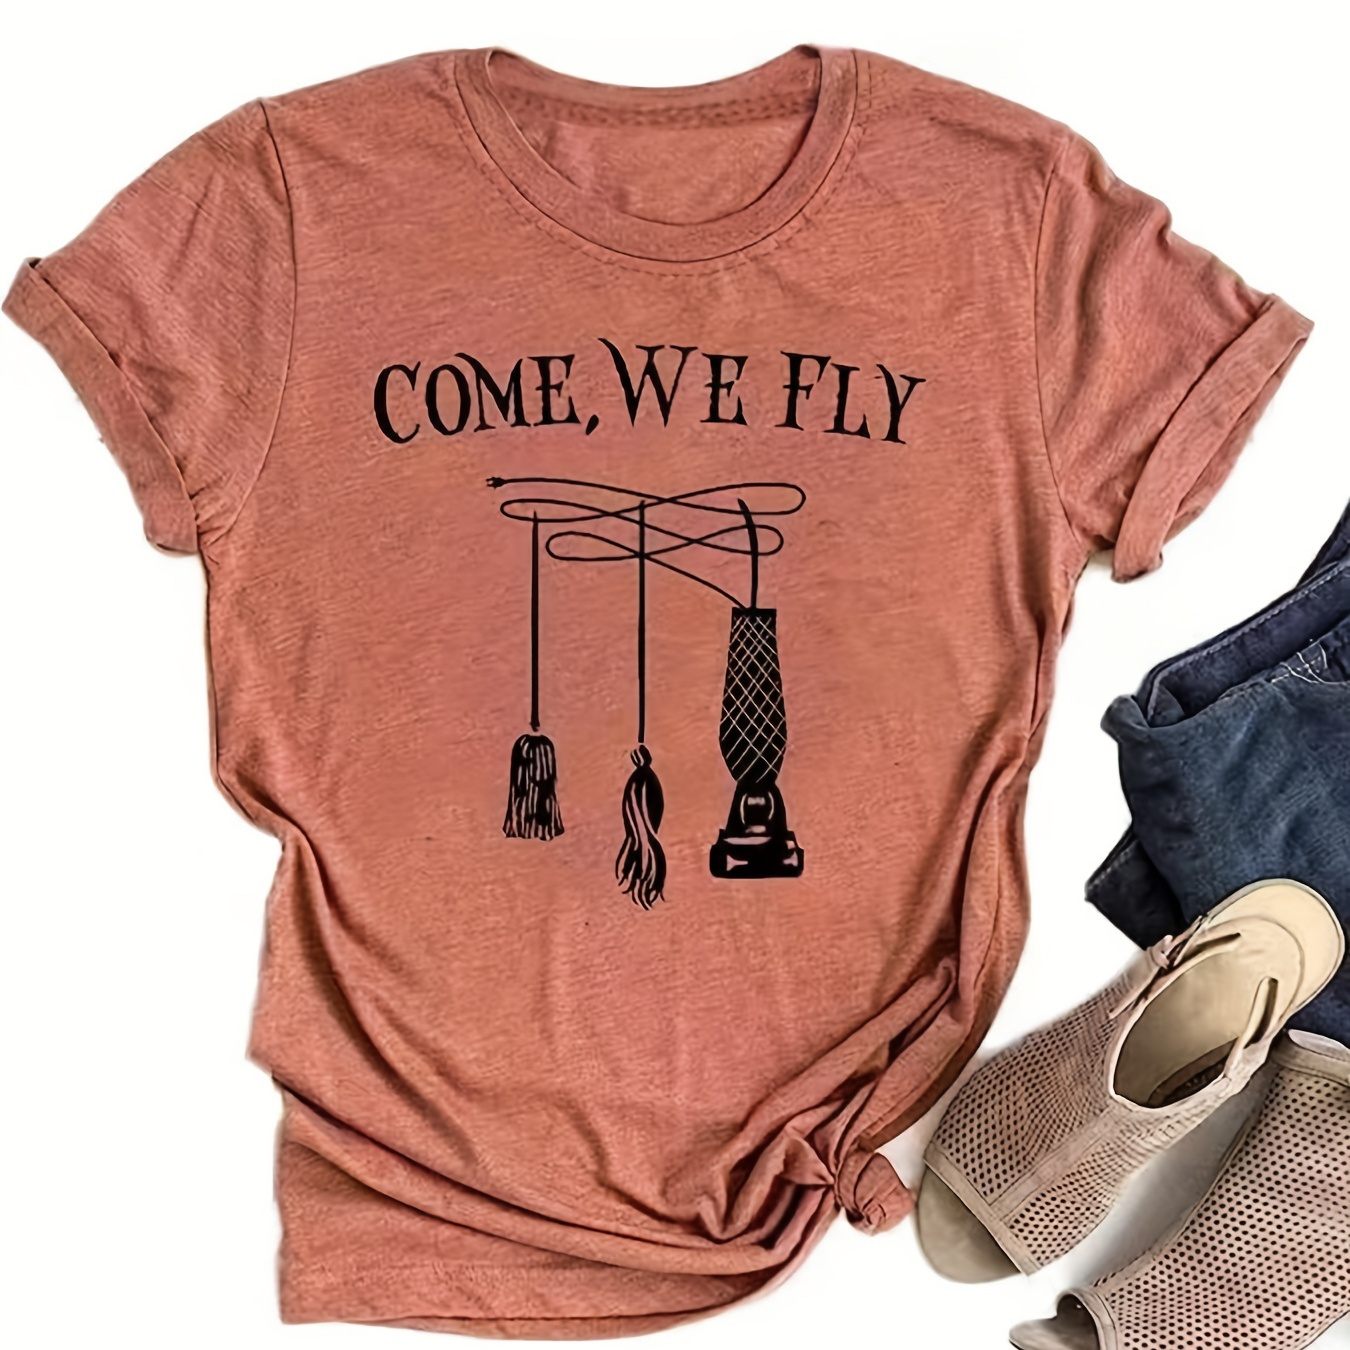 

Come We Fly Print Crew Neck T-shirt, Casual Short Sleeve Top For Spring & Summer, Women's Clothing